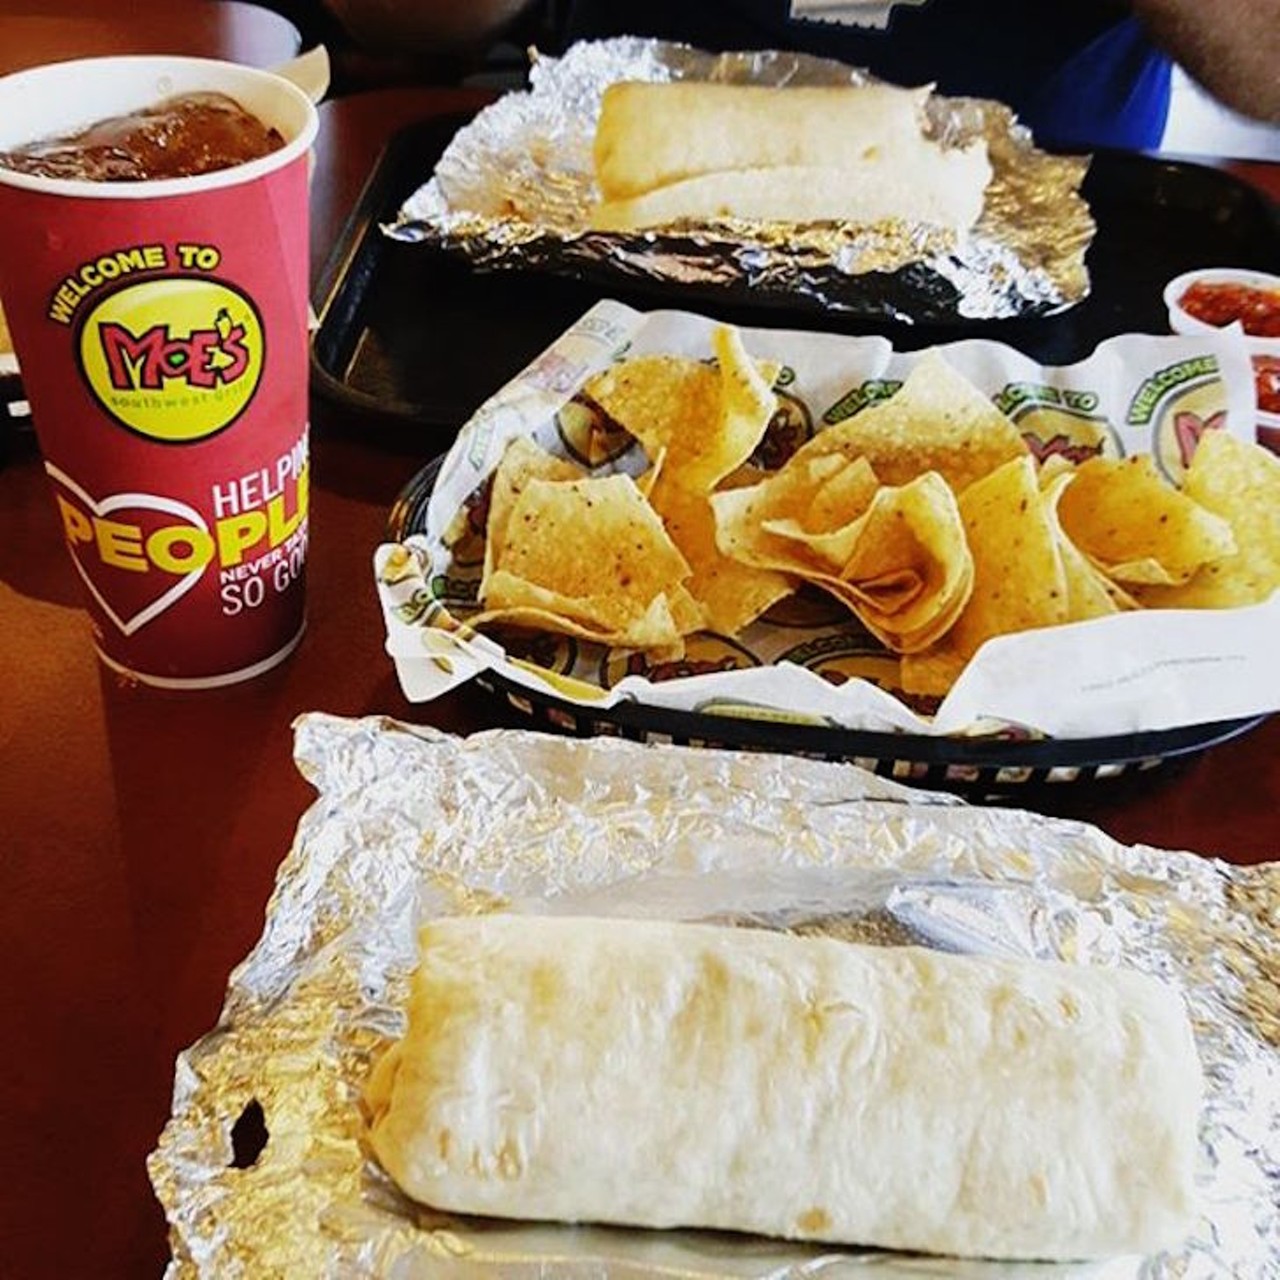 Moe&#146;s Southwest Grill
4650 N. Alafaya Trail; 423 N. Alafaya Trail
You&#146;re pretty much out of the loop if you haven&#146;t taken part in Moe&#146;s Monday at least once in your lifetime. For $6.49, customers can get a burrito, chips, salsa and a drink. There are several options to choose from when making a burrito, or you can step out of your comfort zone and try the Chili con Queso Burrito. Wrapped in a flour or whole-grain tortilla, Moe&#146;s famous queso is mixed with seasoned ground beef and fresh jalape&ntilde;os, served with rice, beans, shredded cheese, pico de gallo and your choice of protein.
Photo via justin.ray.johnson88/Instagram